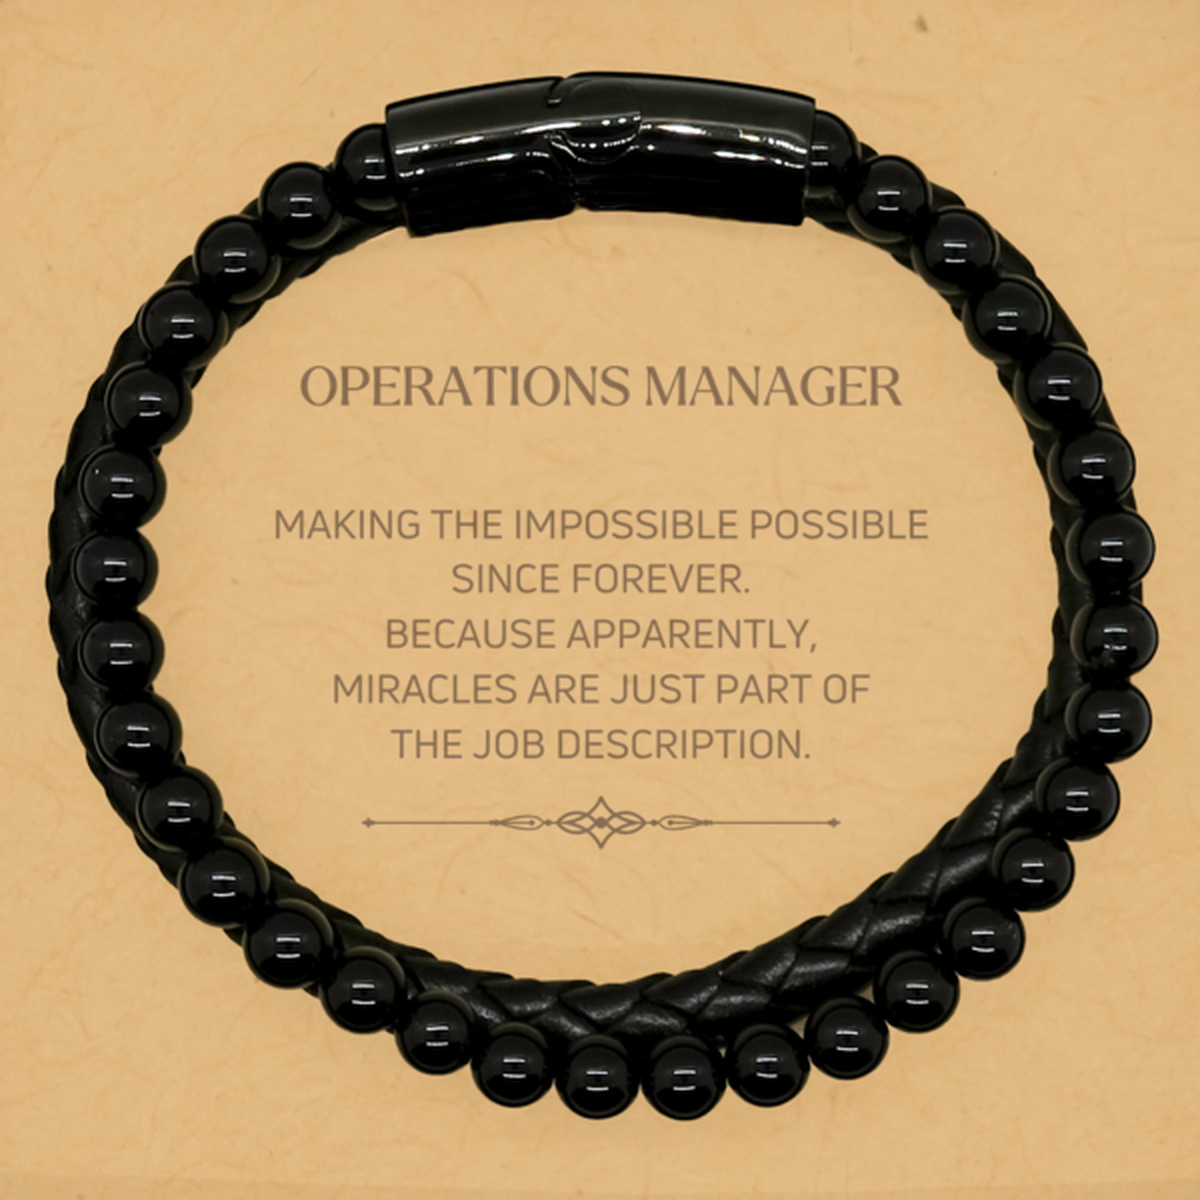 Funny Operations Manager Gifts, Miracles are just part of the job description, Inspirational Birthday Stone Leather Bracelets For Operations Manager, Men, Women, Coworkers, Friends, Boss